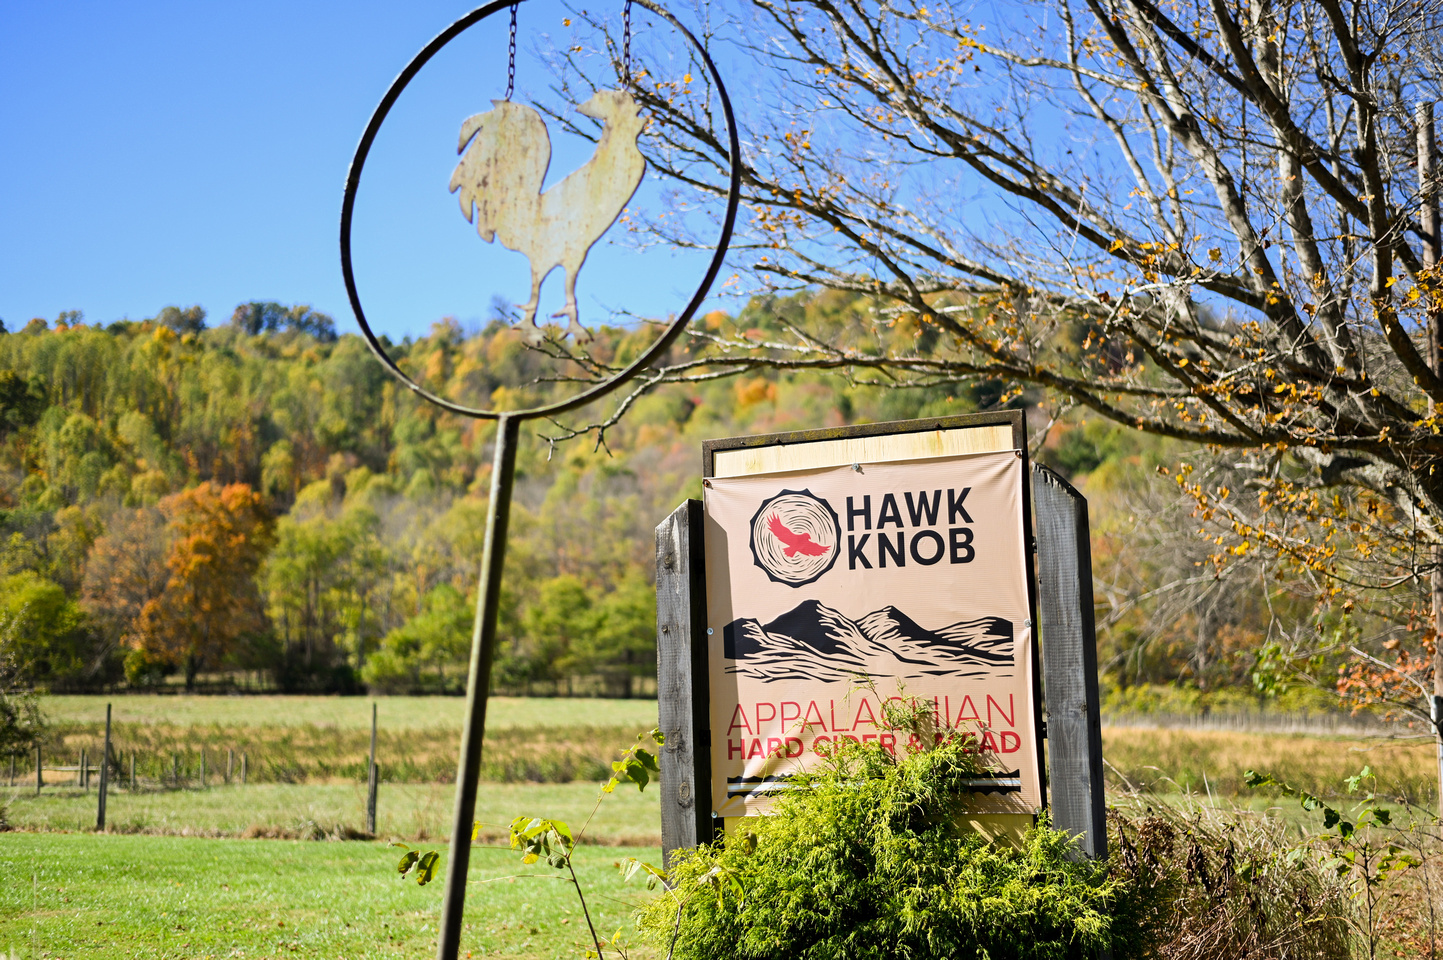 Hawk Knob owner turns lifelong passion into successful agribusiness